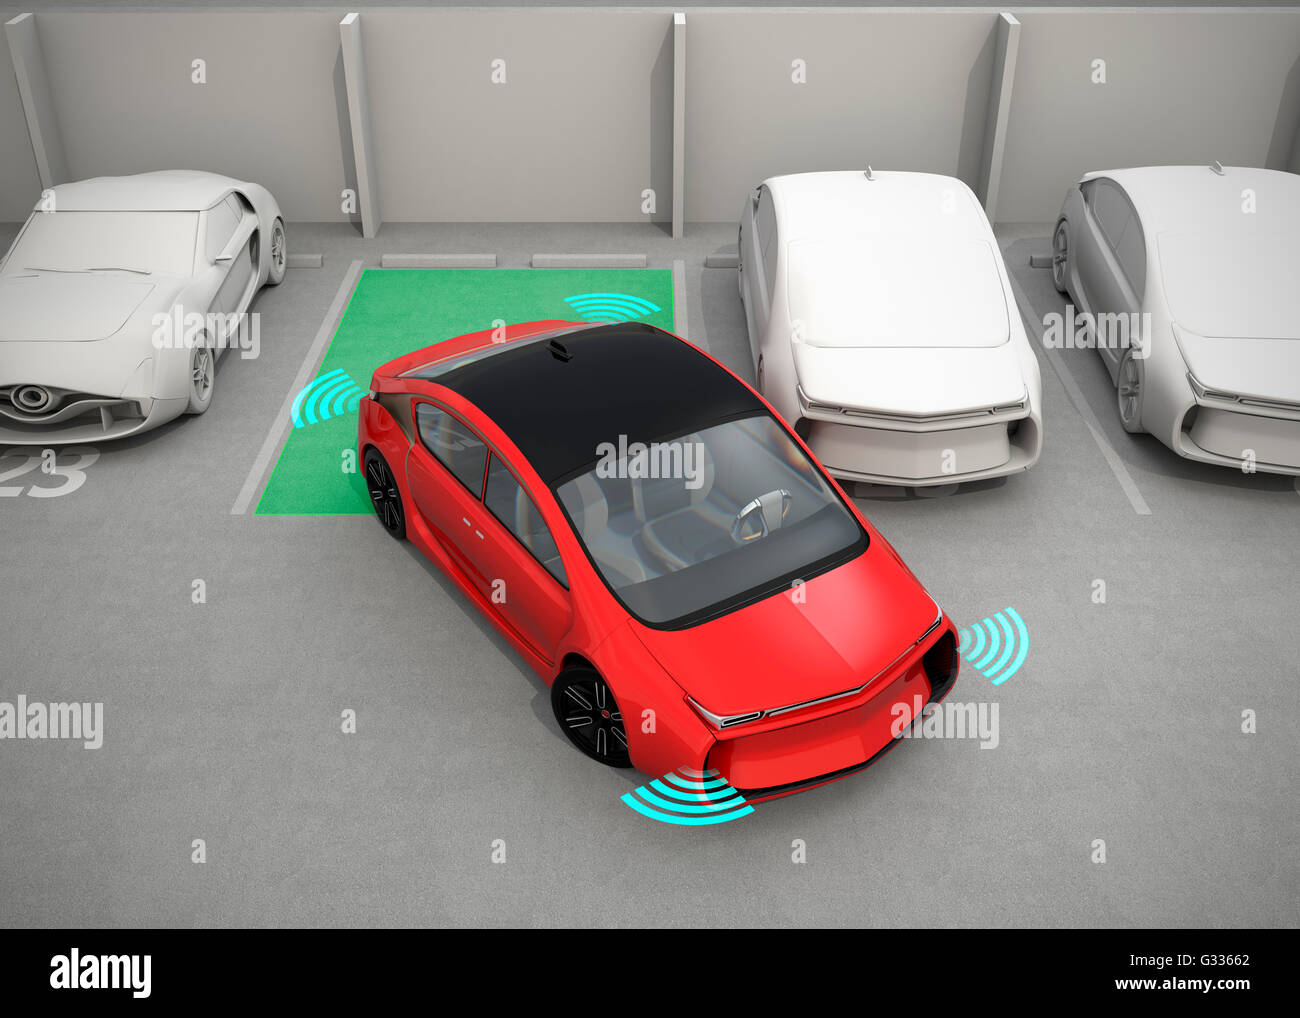 Red electric car driving into parking lot with parking assist system. 3D rendering image. Stock Photo